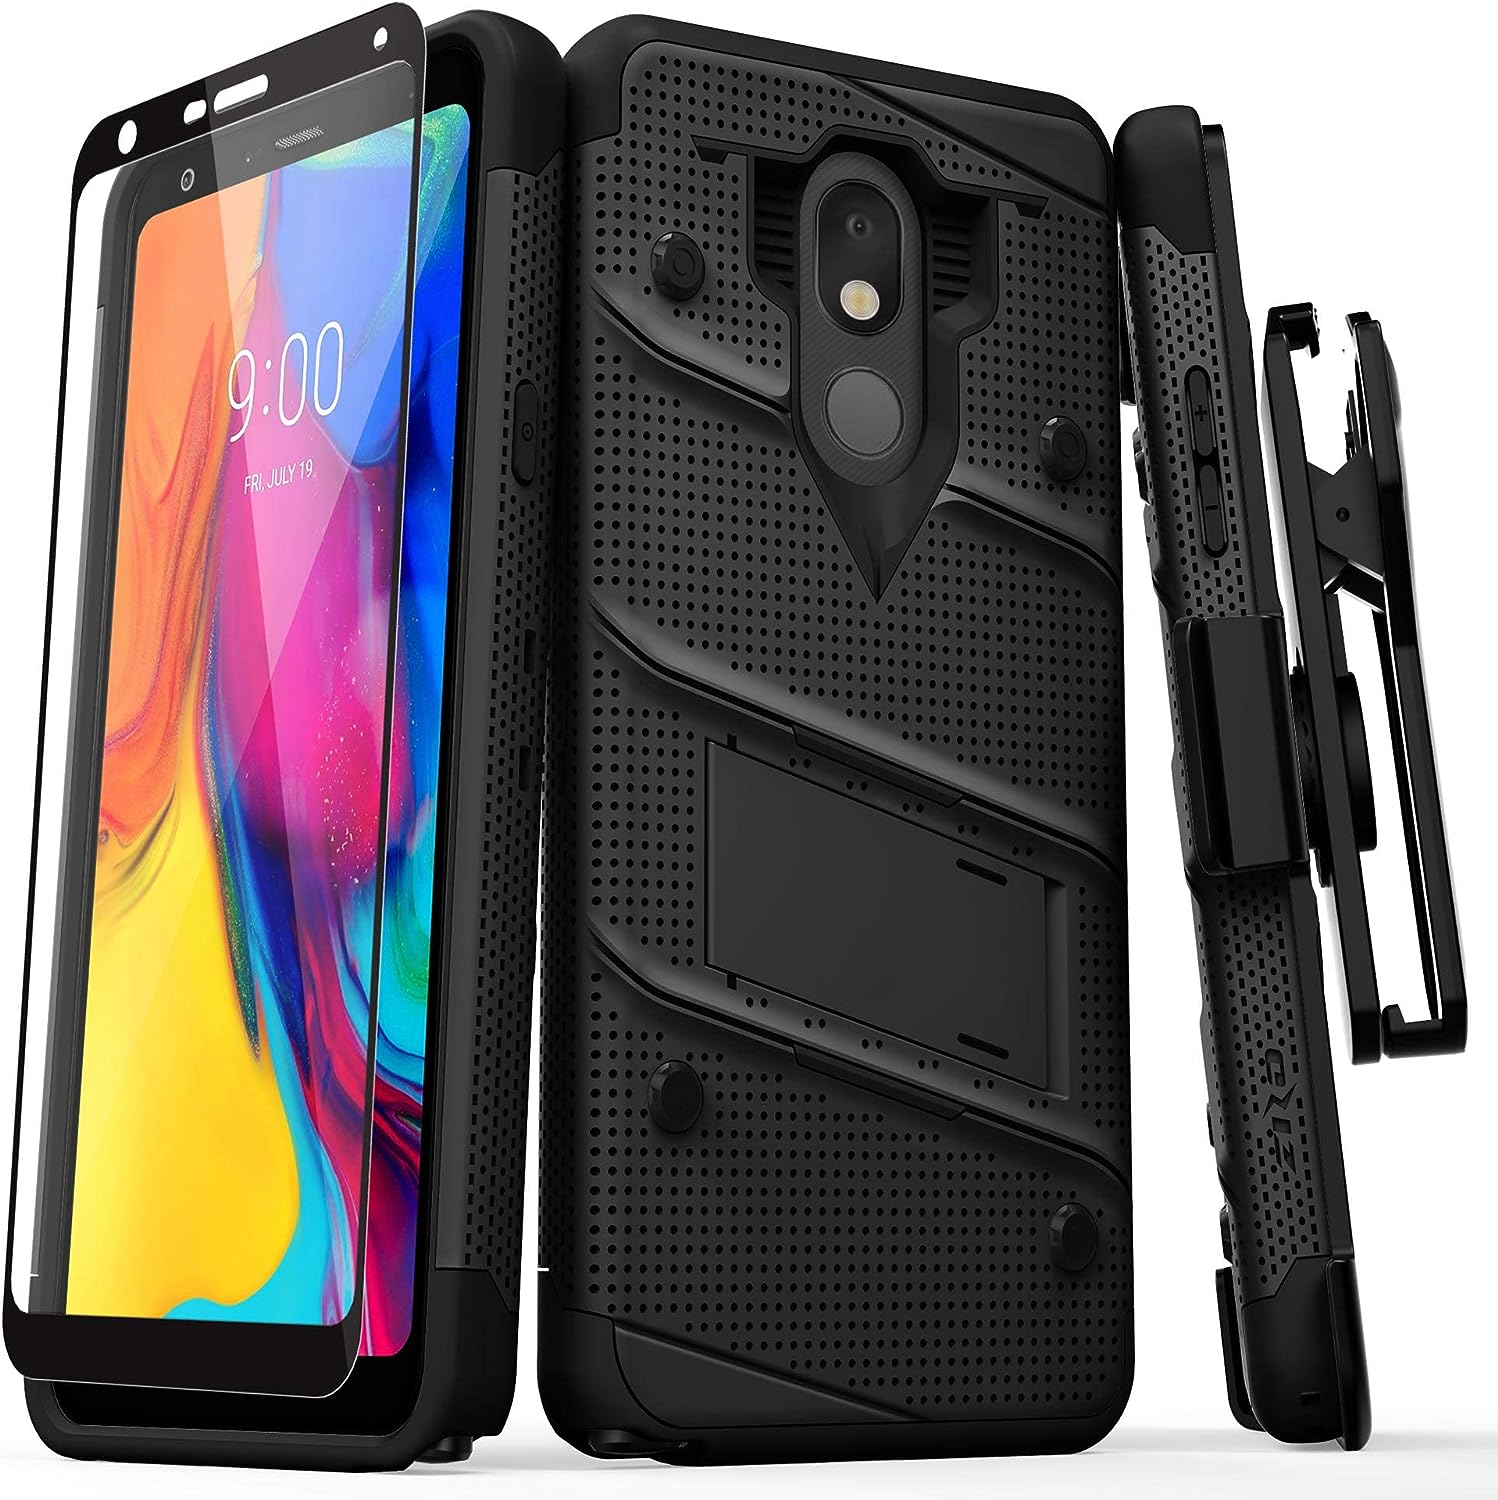 ZIZO Bolt LG Stylo 5 Holster Case with Built-in Kickstand, Glass Screen Protector and Lanyard - Black